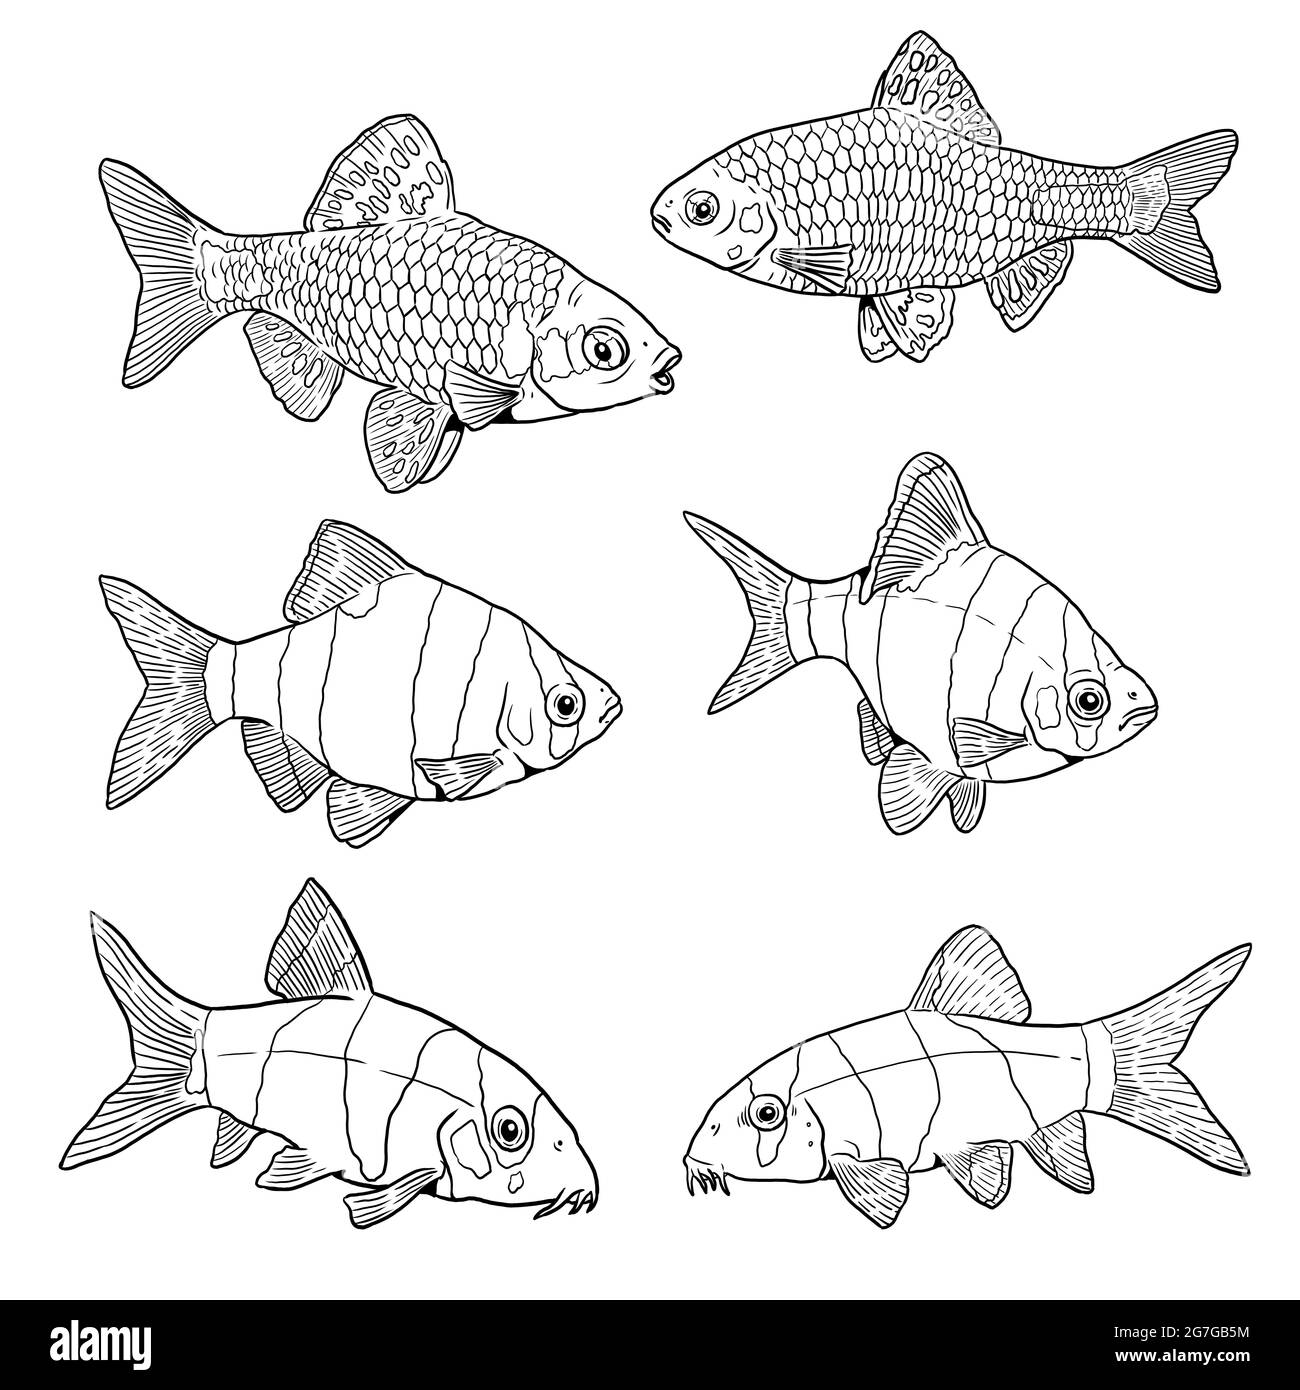 Sumatra barb, Odessa barb and tiger botia for coloring. Colorful tropical fish templates. Coloring book for children and adults. Stock Photo